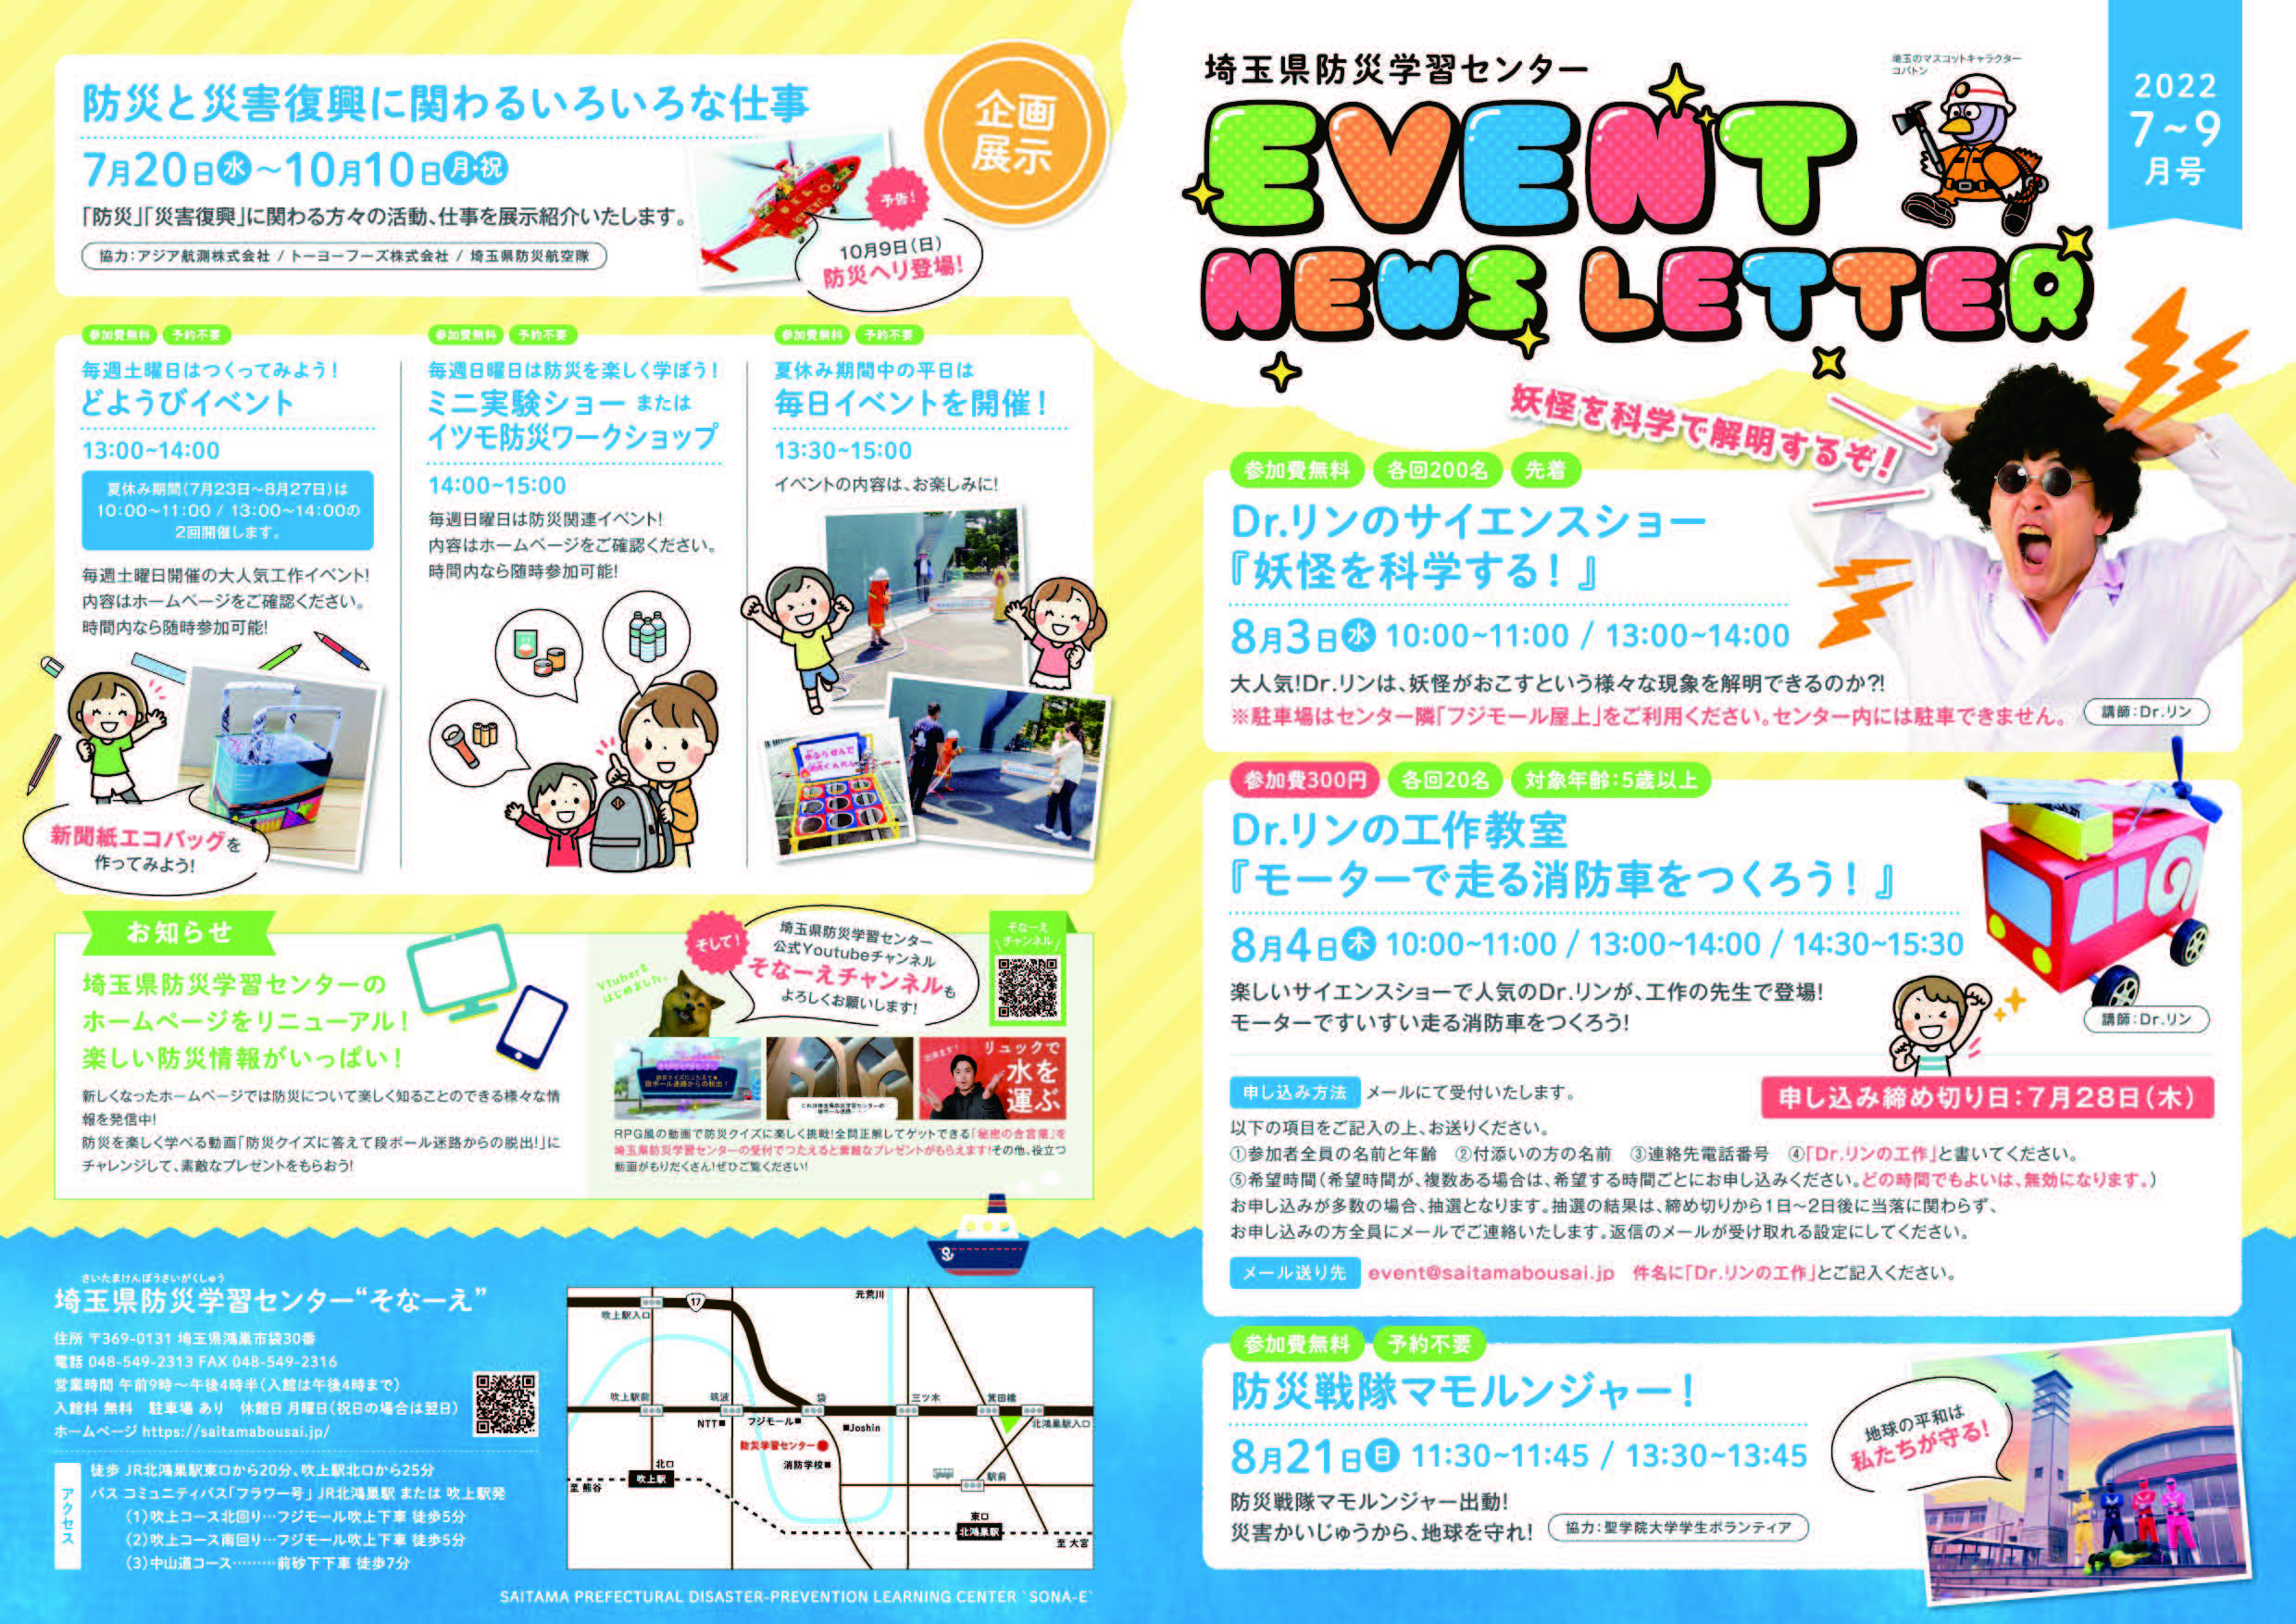 event news letter_220625_ページ_1